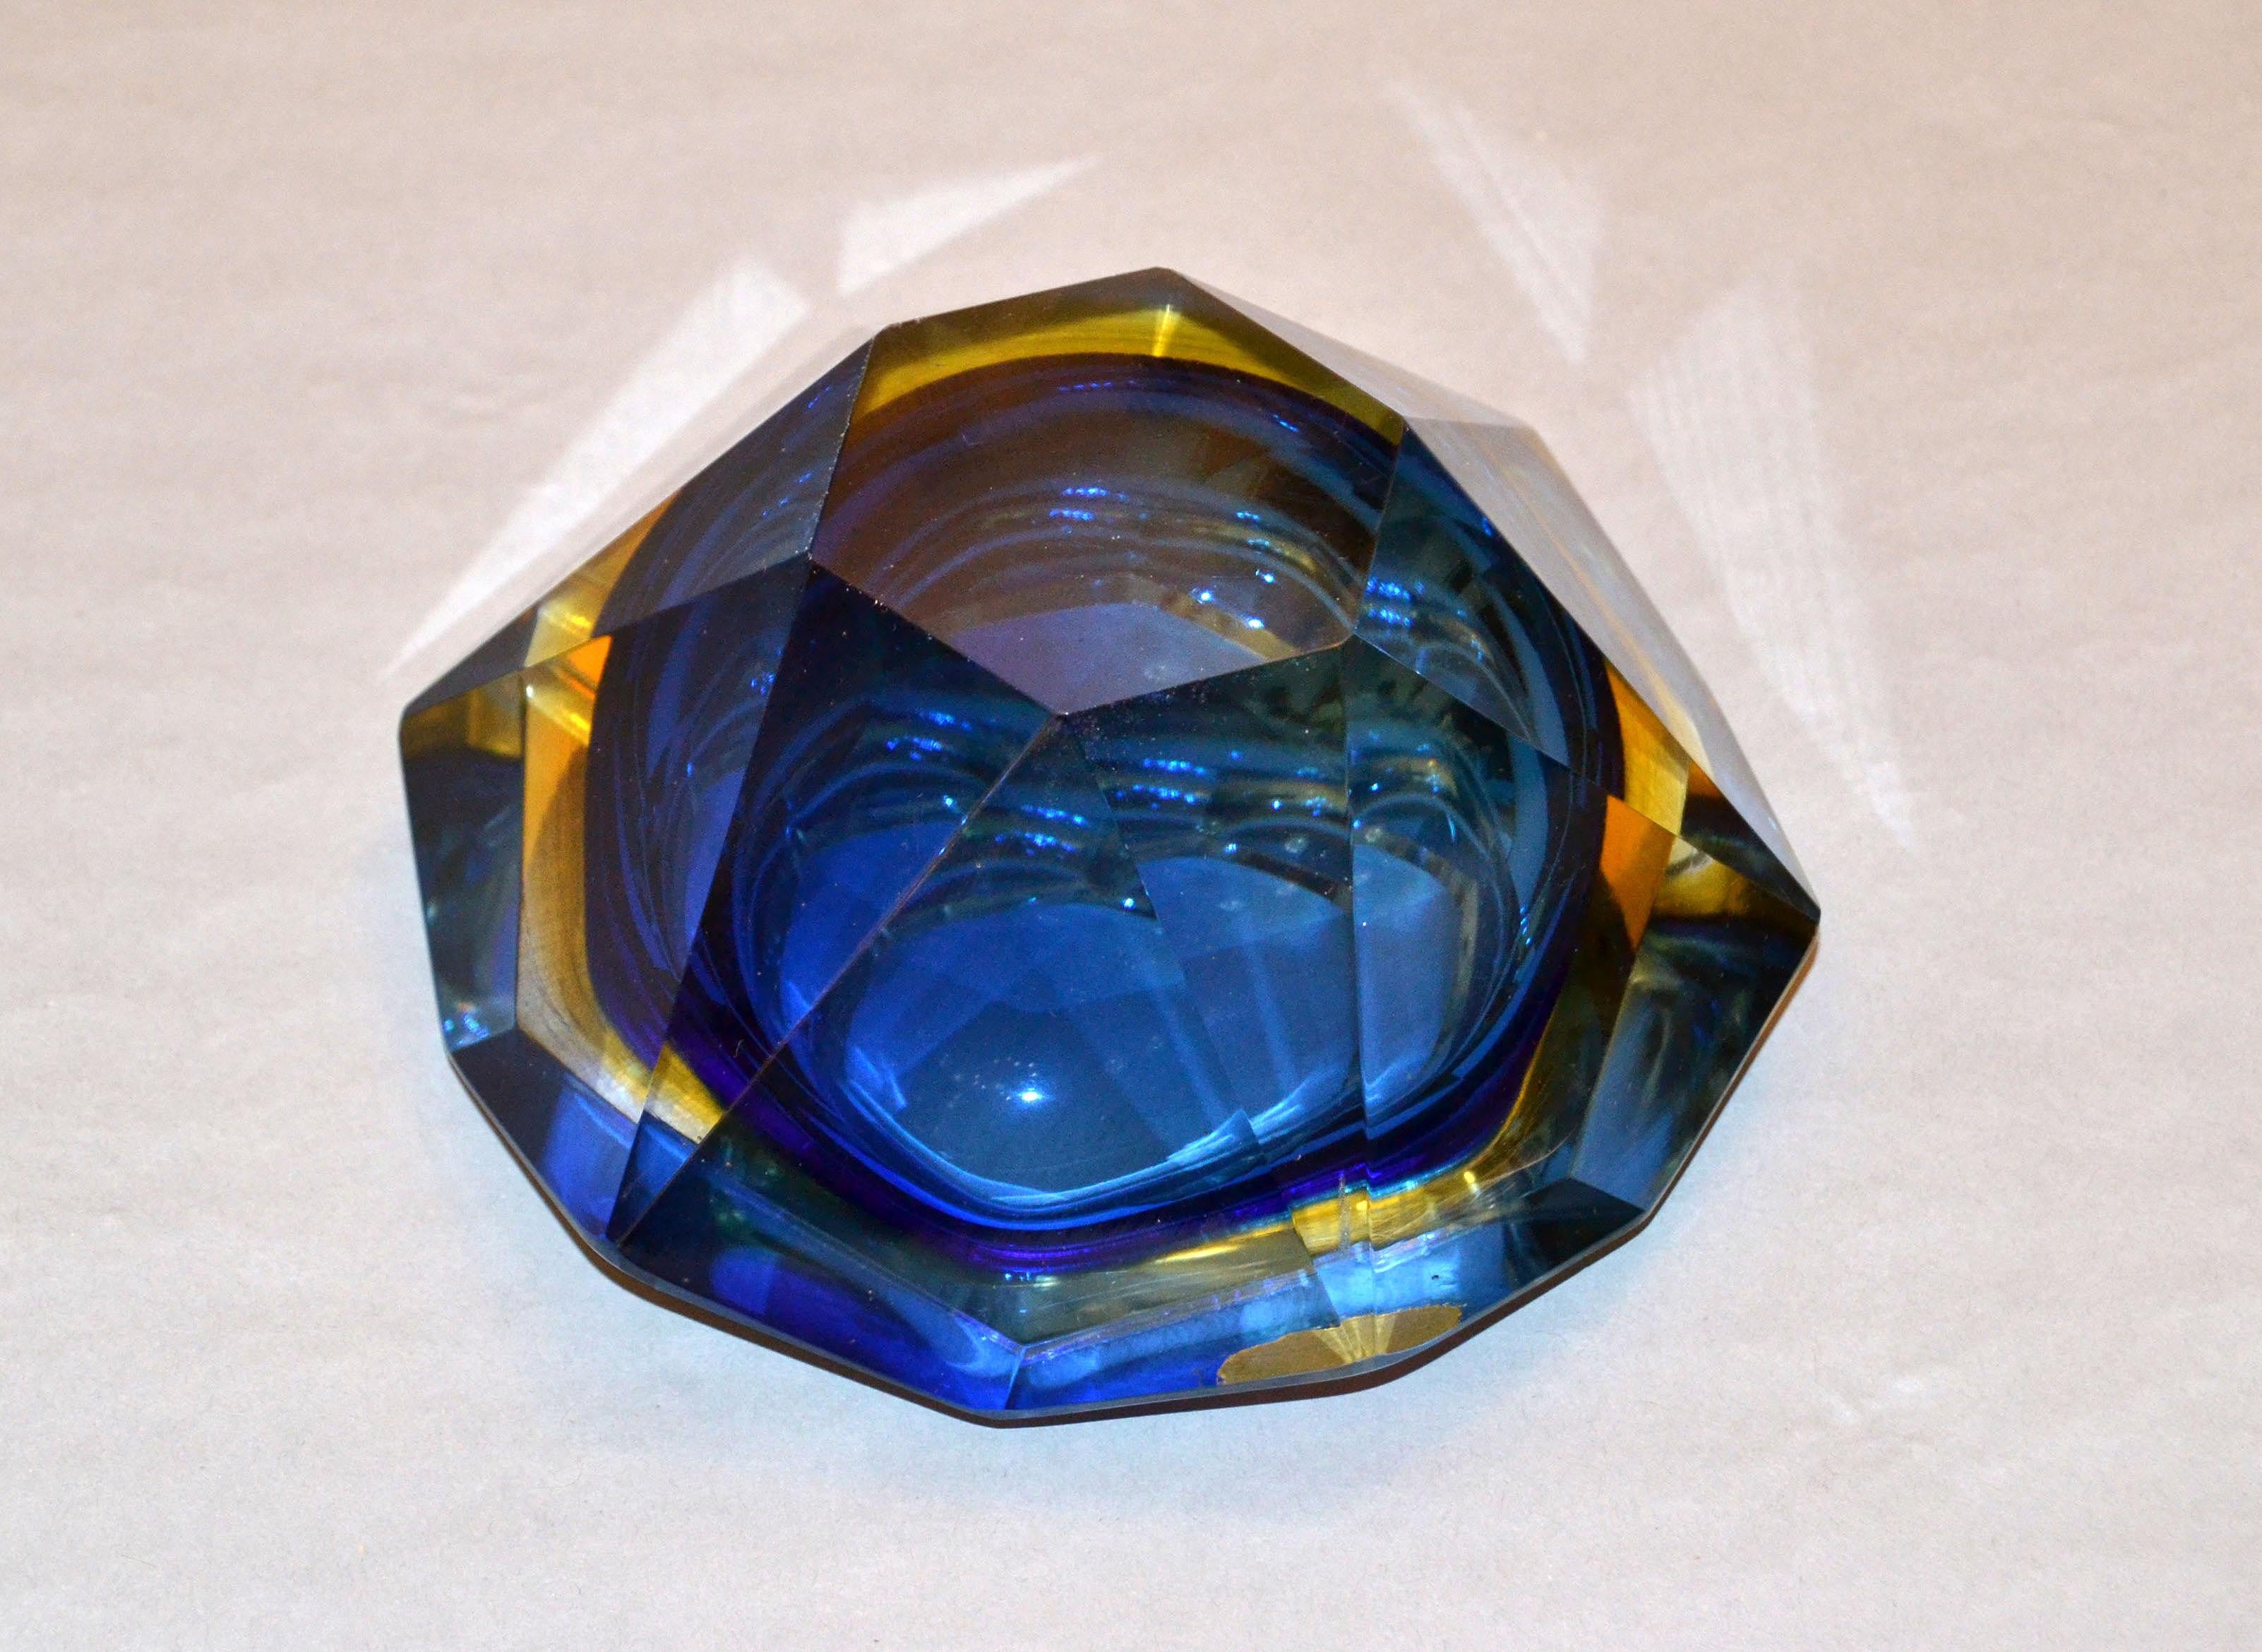 Multifaceted blue, yellow and clear Murano glass ashtray, glass bowl attributed to Flavio Poli by V.A.M. Vetri Molati Murano, Italy.
Blue and amber glass cased into clear glass and a highly decorative twelve faced geometric design.
Original label